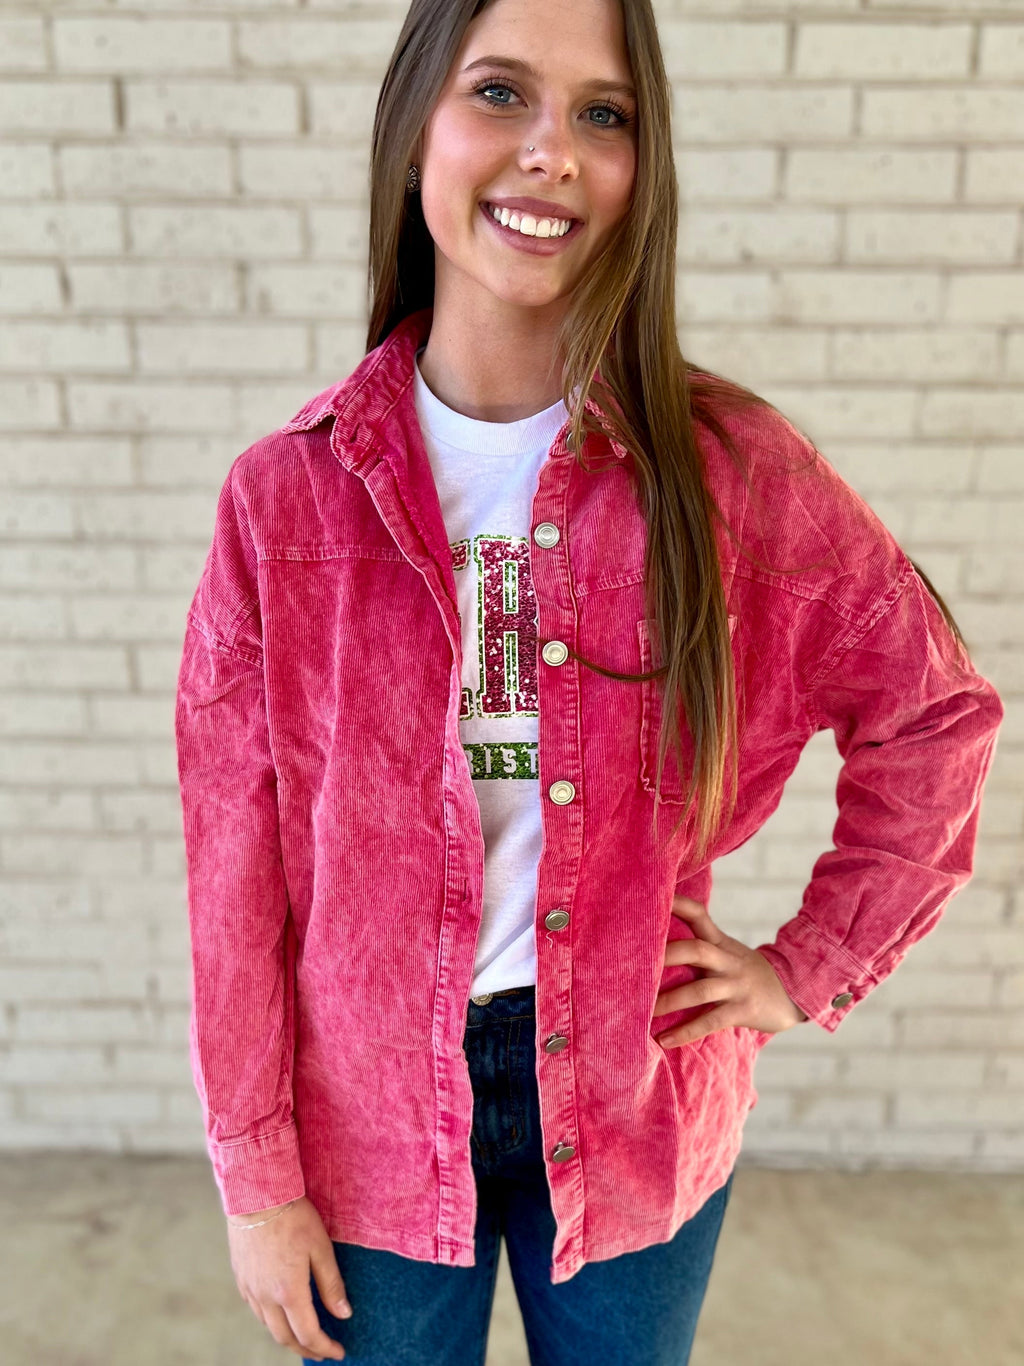 This Pink Acid Wash Corduroy Shacket is perfect for days when you just can't decide! It's the perfect mix of oversized style with a hi-low hem and long sleeve cut, making it oh-so-versatile. The acid-washed pink hue adds a side of chill, while front button closure keeps it fresh and flirty. Throw it on and go!  100% Polyester